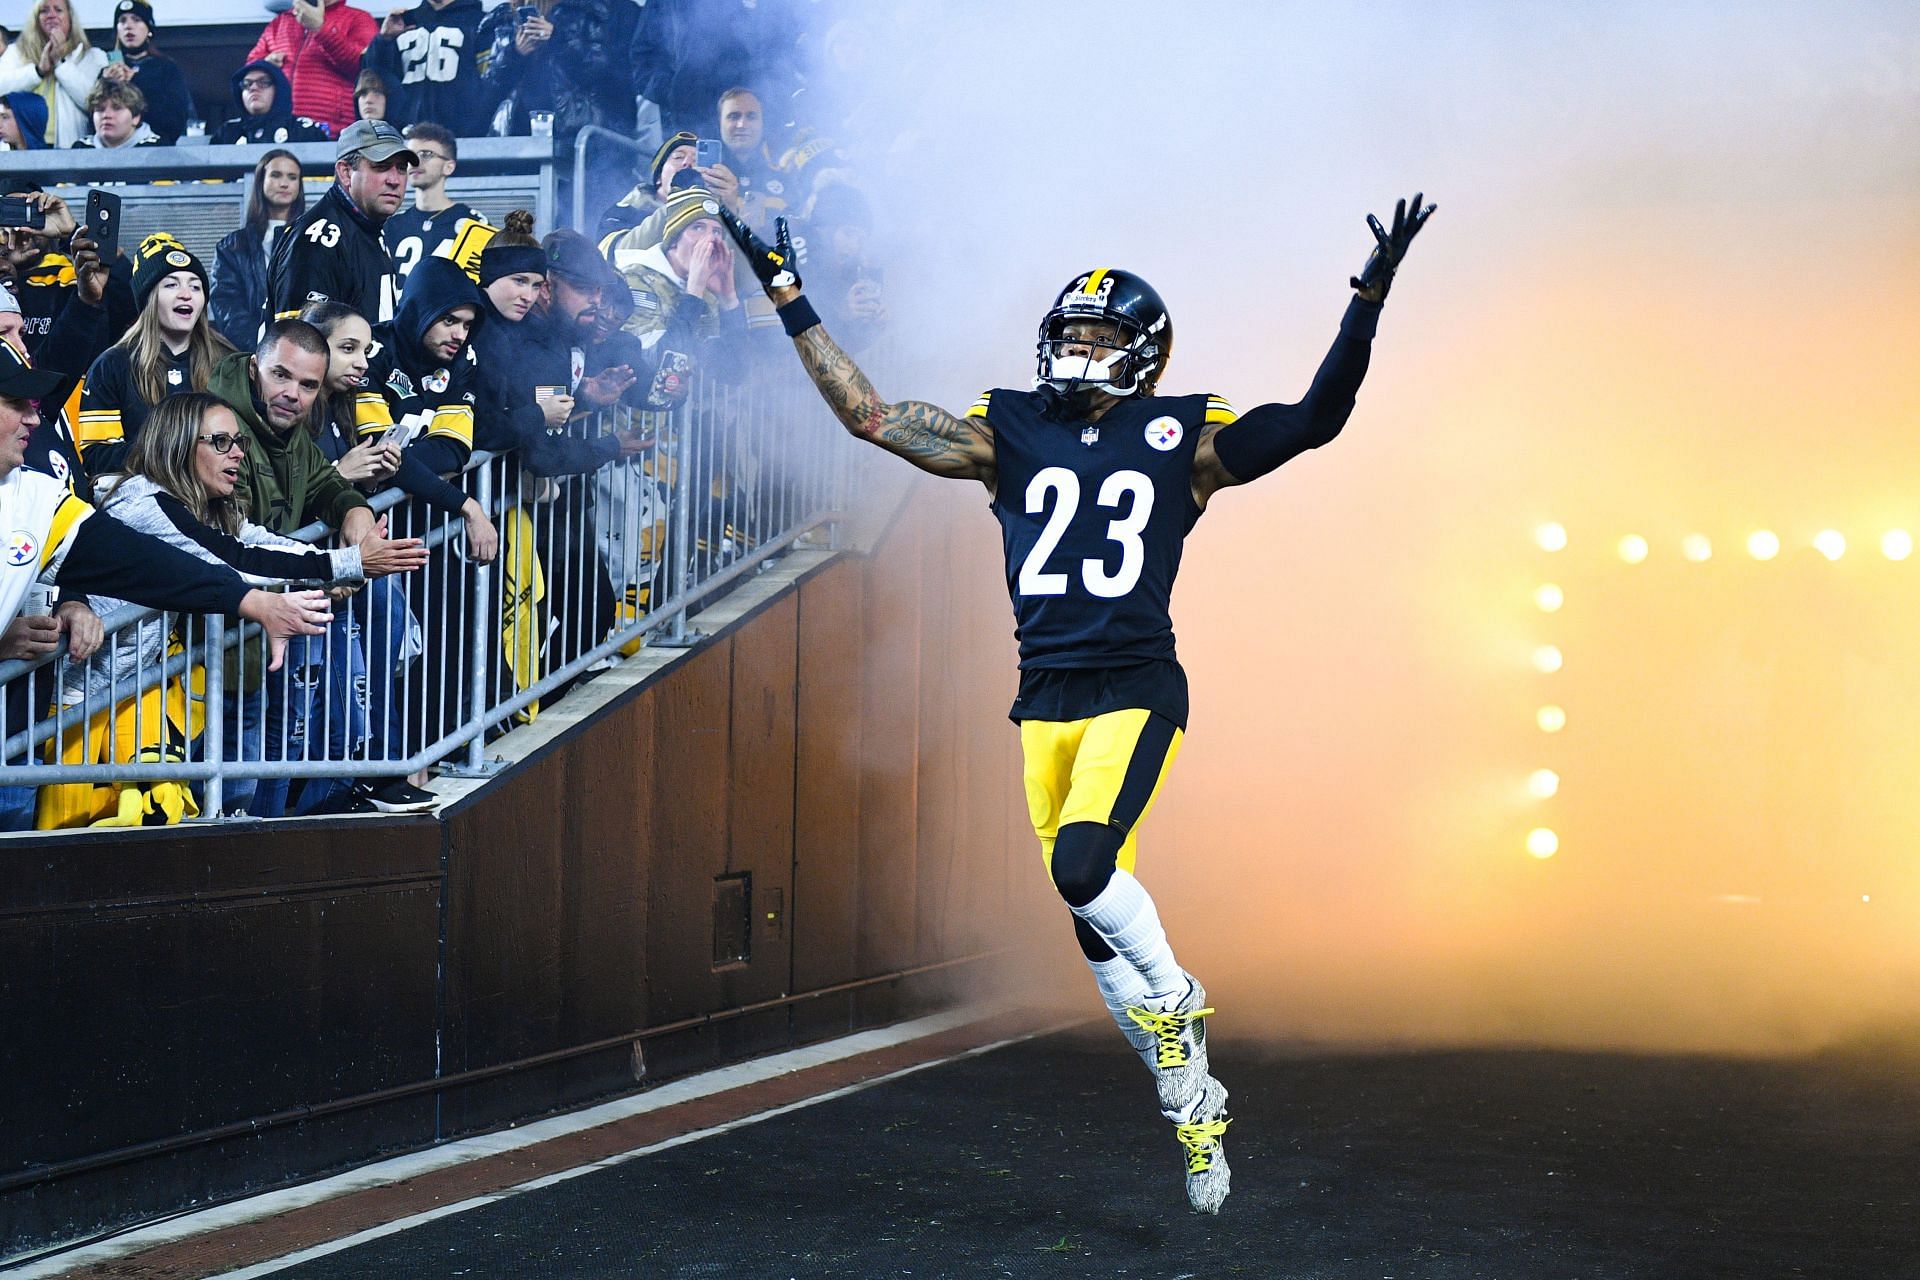 Joe Haden taking the pitch for the Pittsburgh Steelers